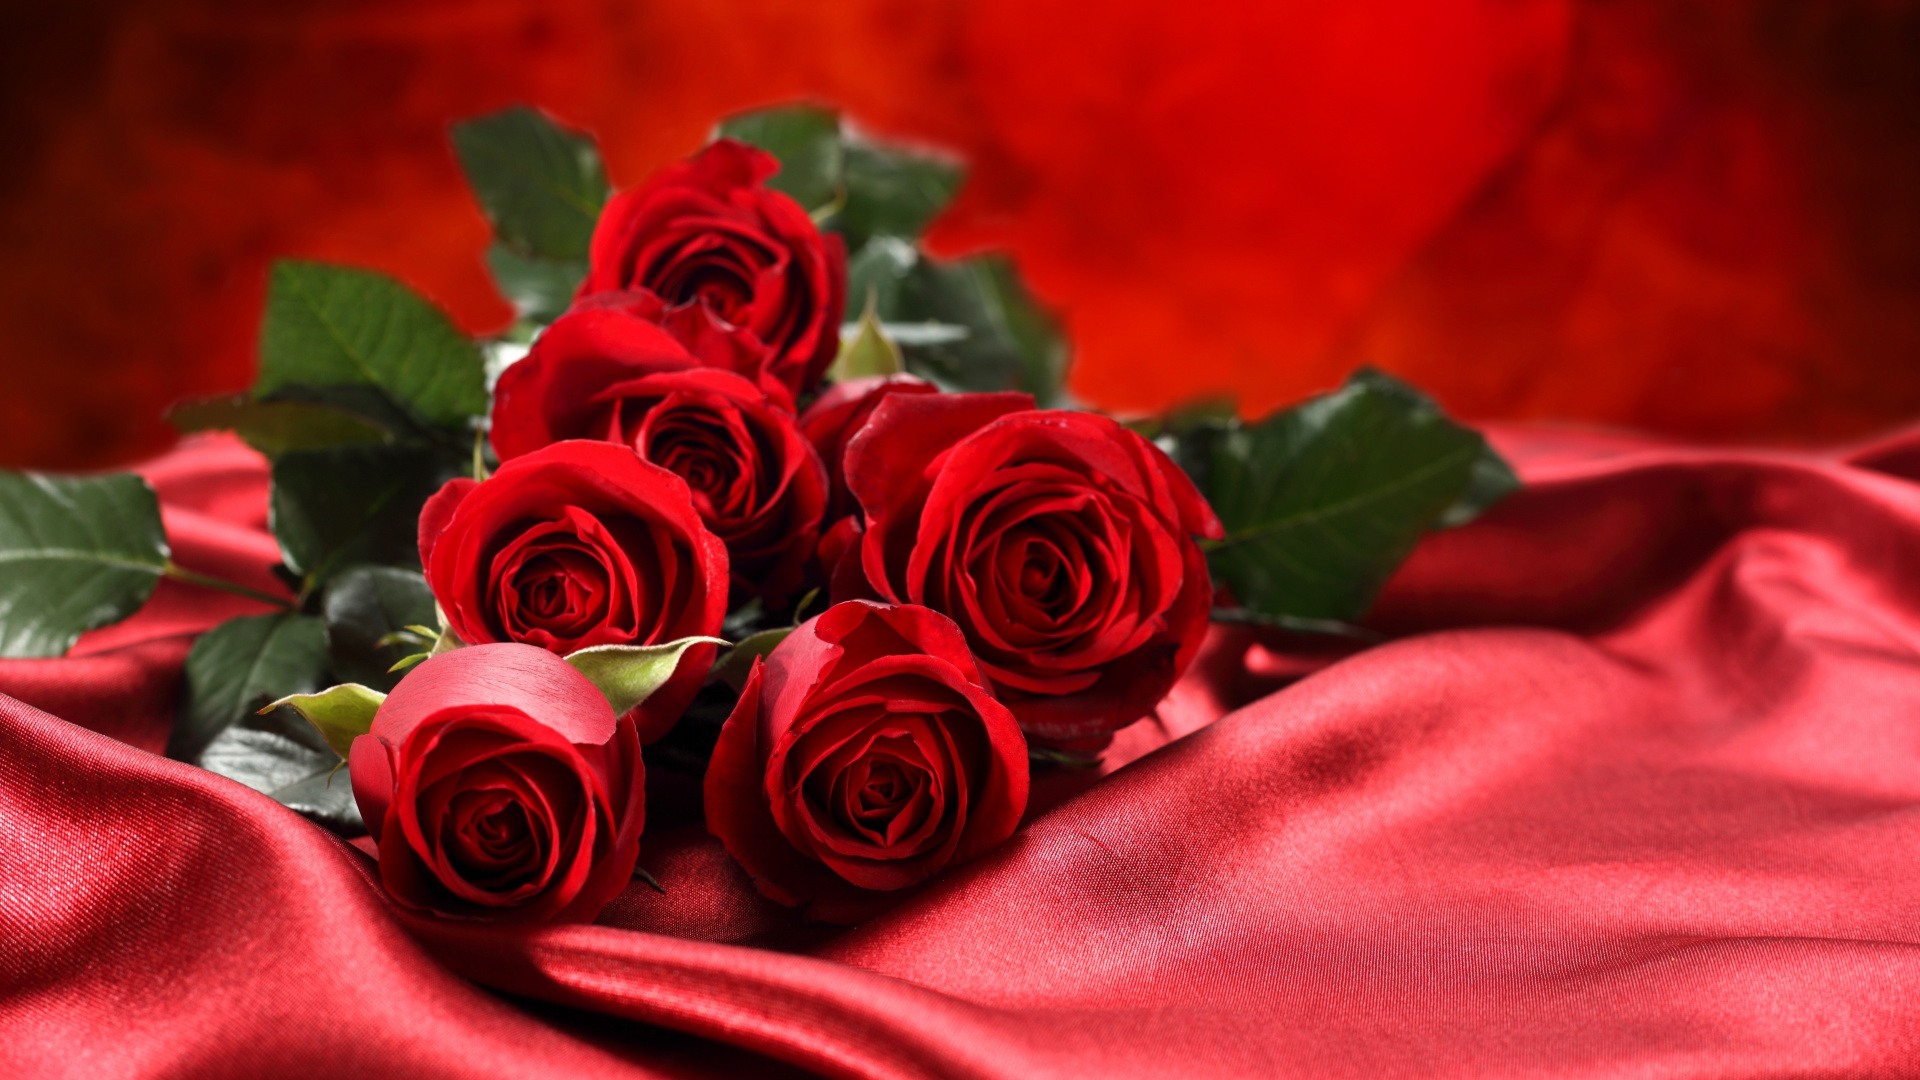 Roses Rouges Sur Textile Rouge. Wallpaper in 1920x1080 Resolution